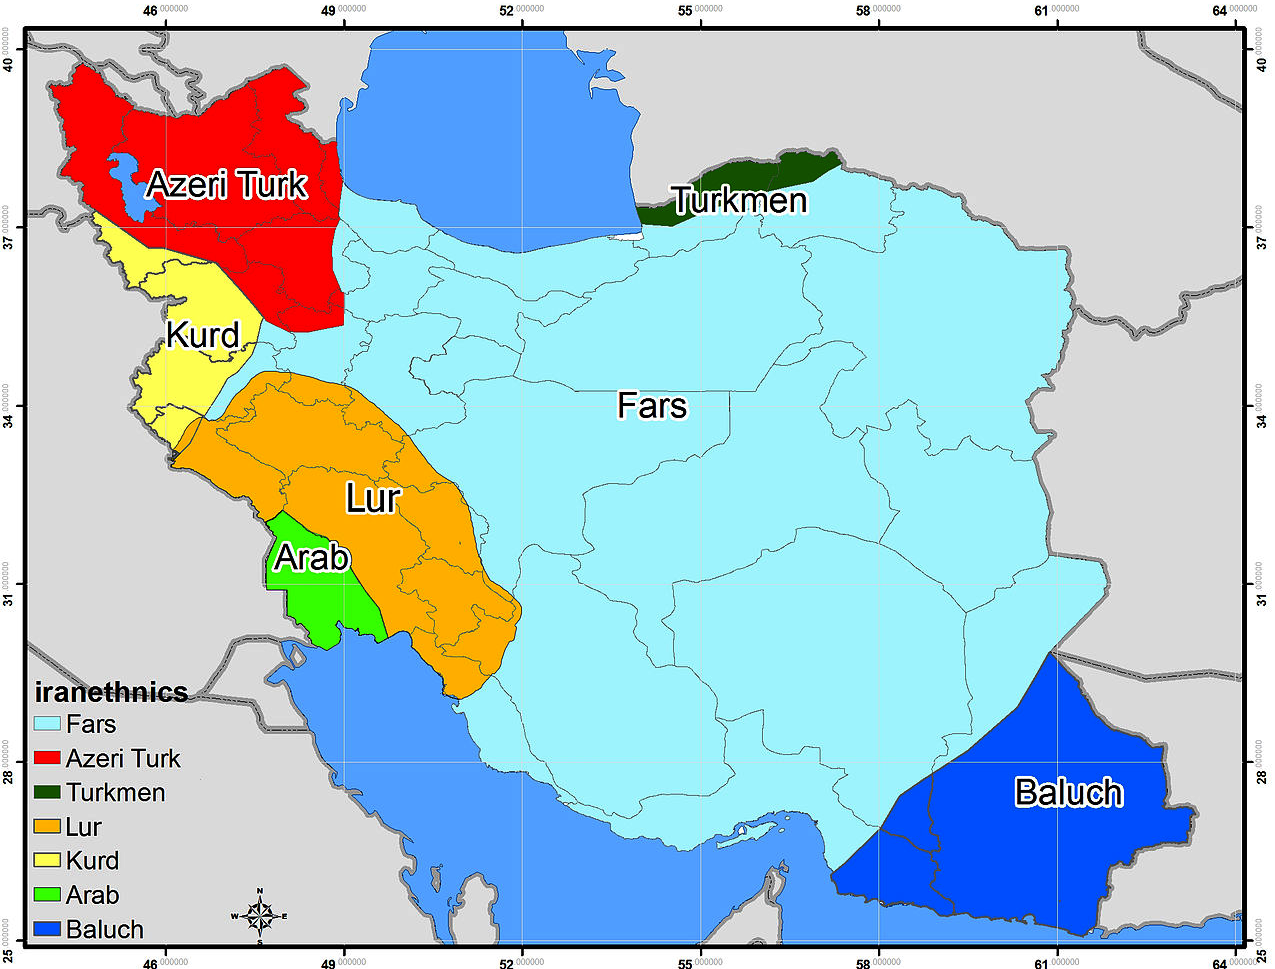 Infographic showing the different ethnic groups in Iran (source: Wikimedia)